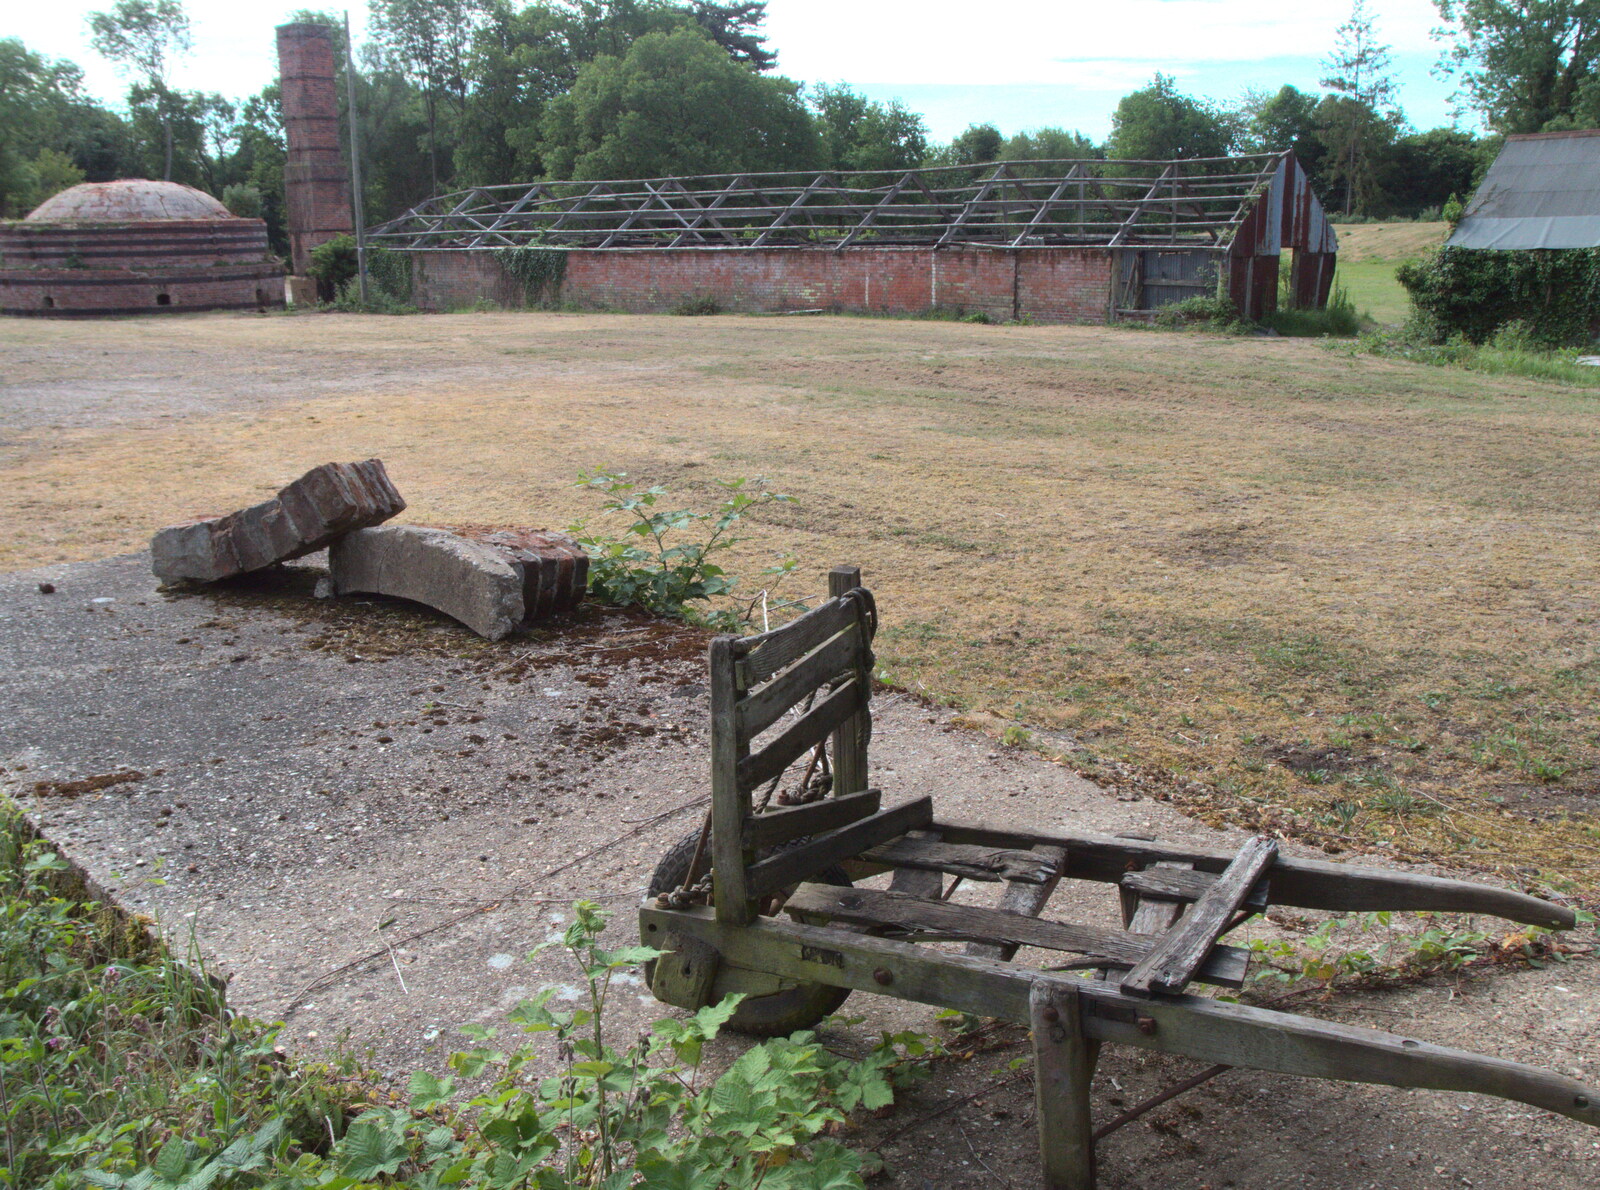 An old trolley, and the Hoxne Brickworks from The Old Brickworks and a New Road, Hoxne and Eye, Suffolk - 26th May 2020